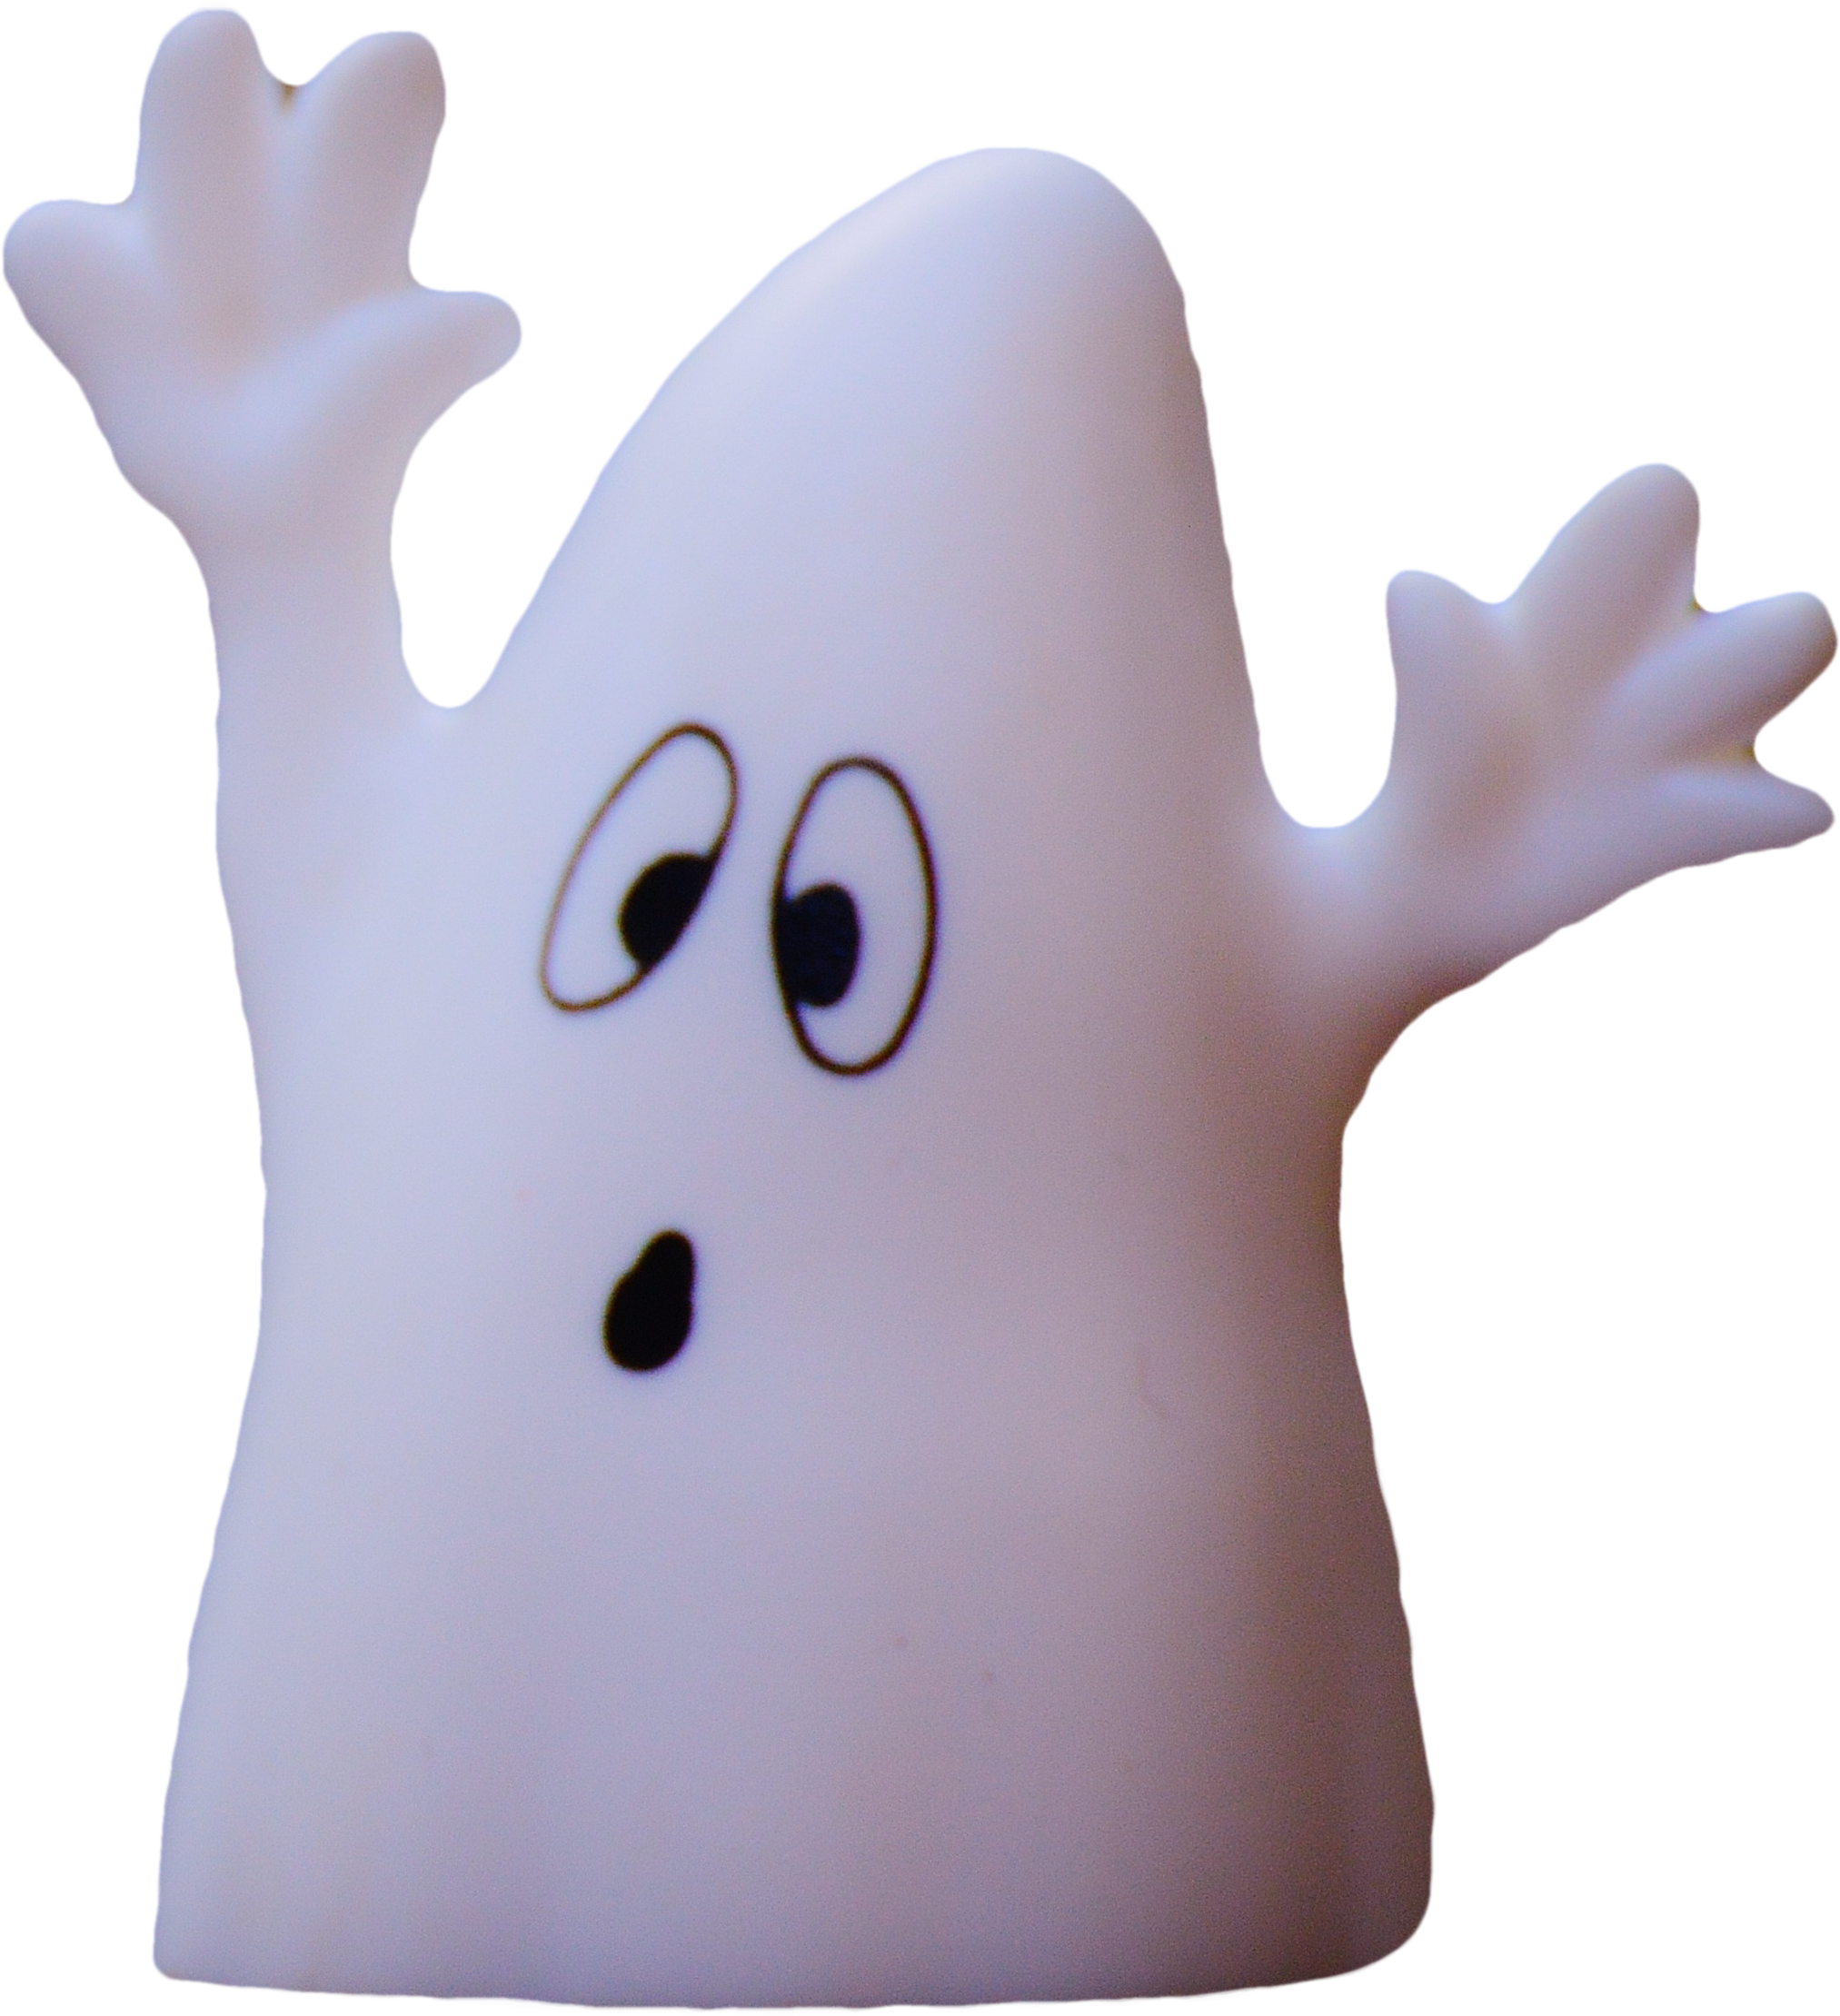 Ghost Vector Free Clipart HQ PNG Image